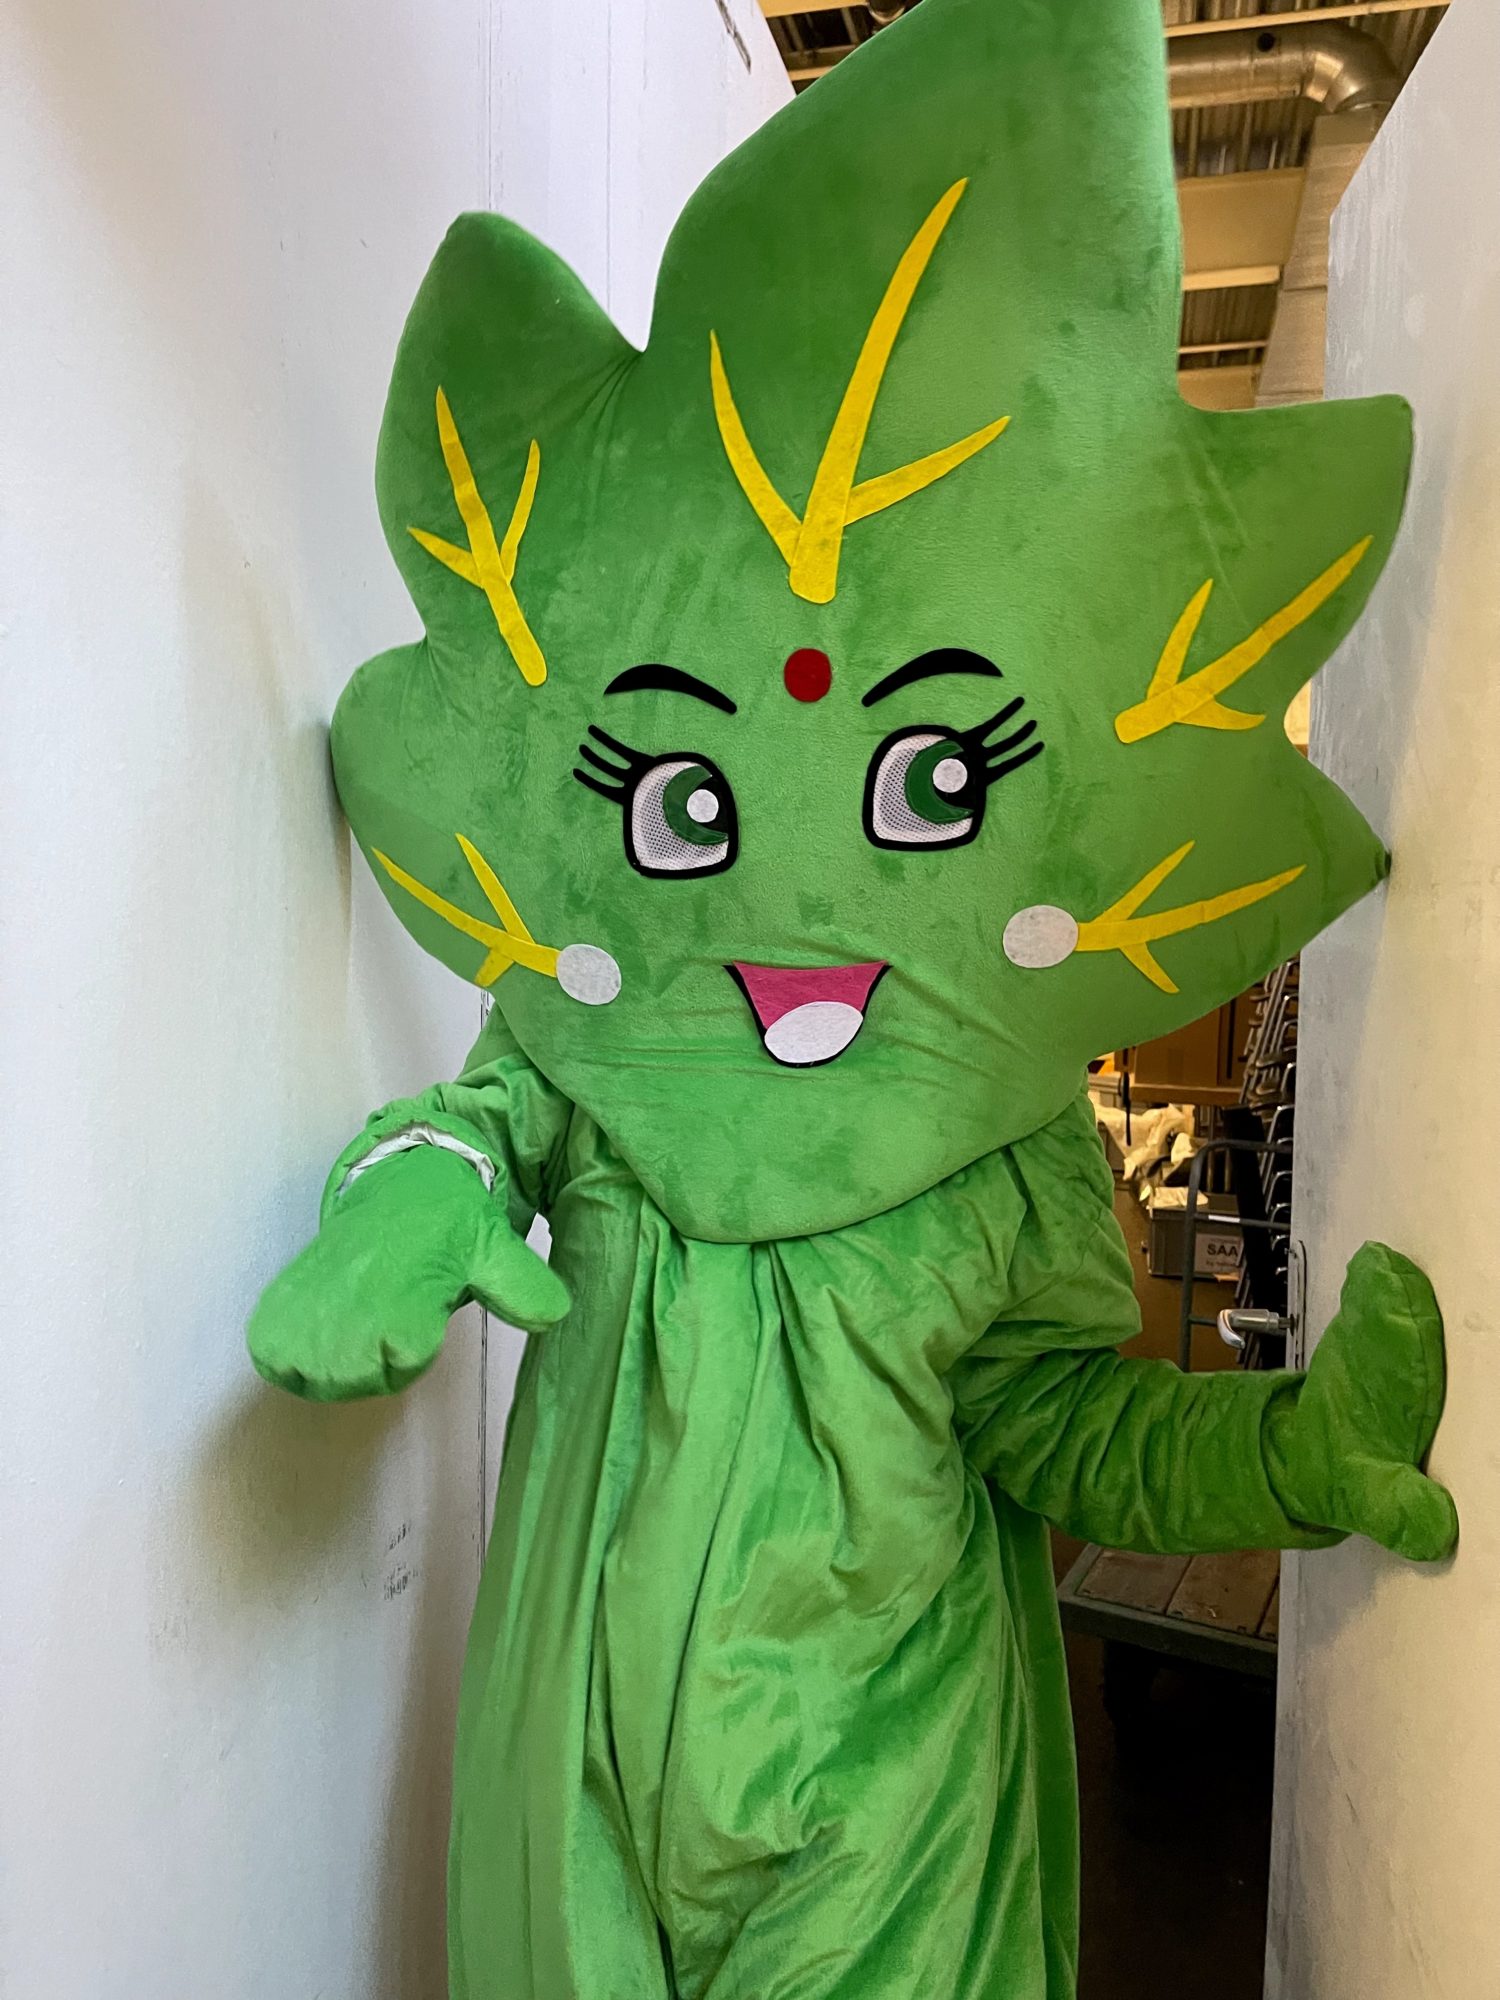 The mascot is representing The Montesinos Federation and Die Unkraut Boschaft (Weed Embassy)